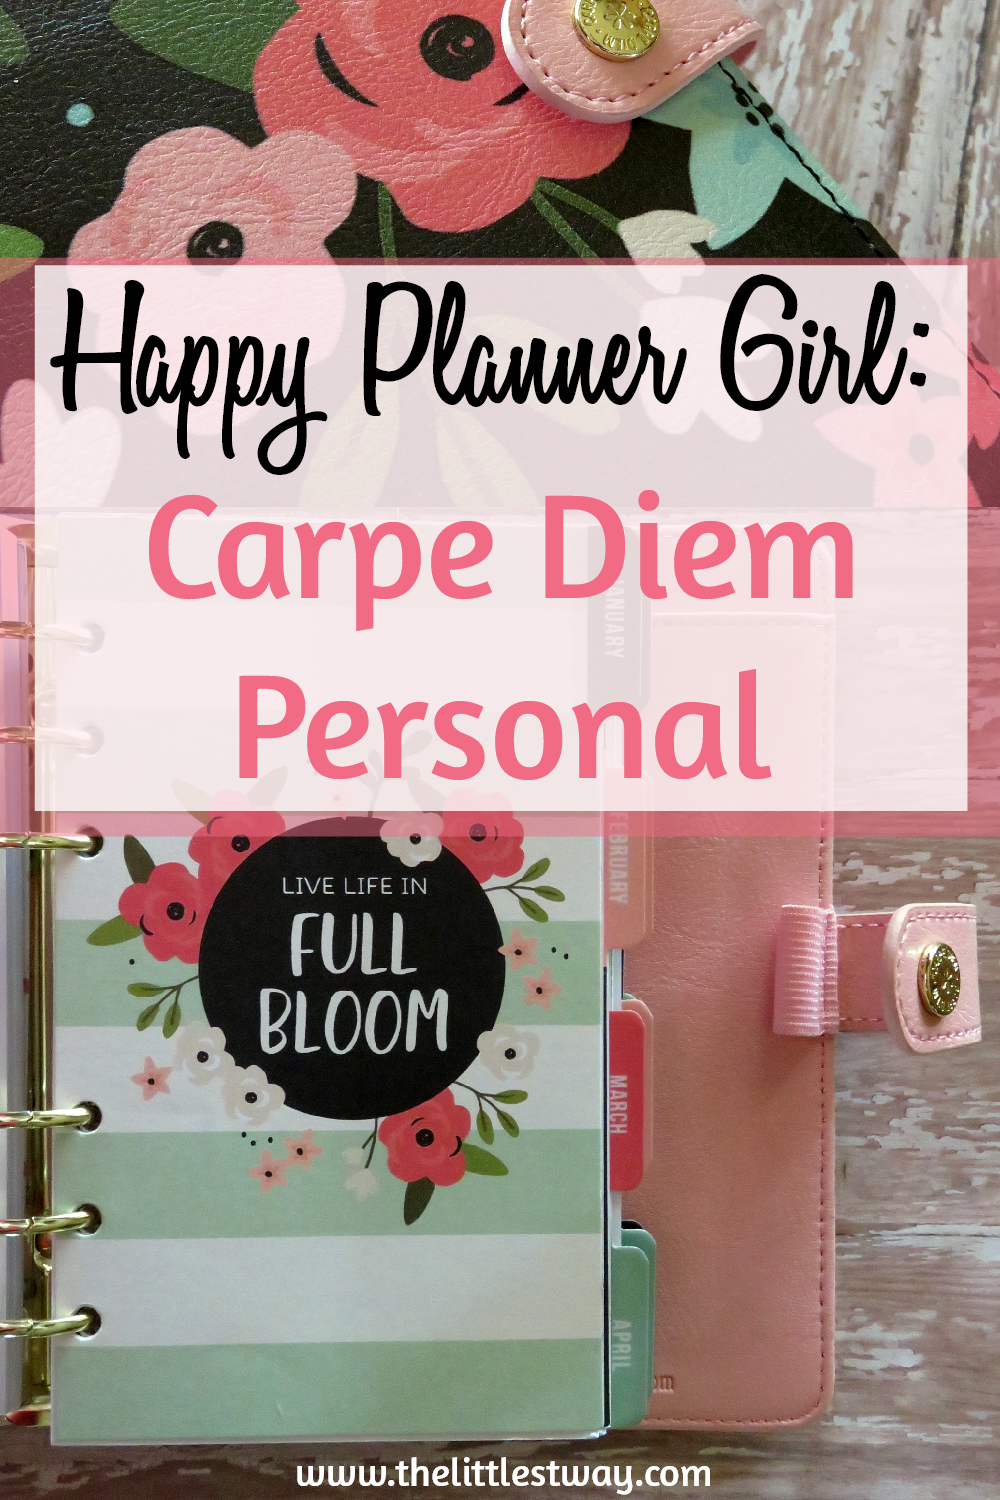 Happy Planner Girl review of the Carpe Diem Personal Planner